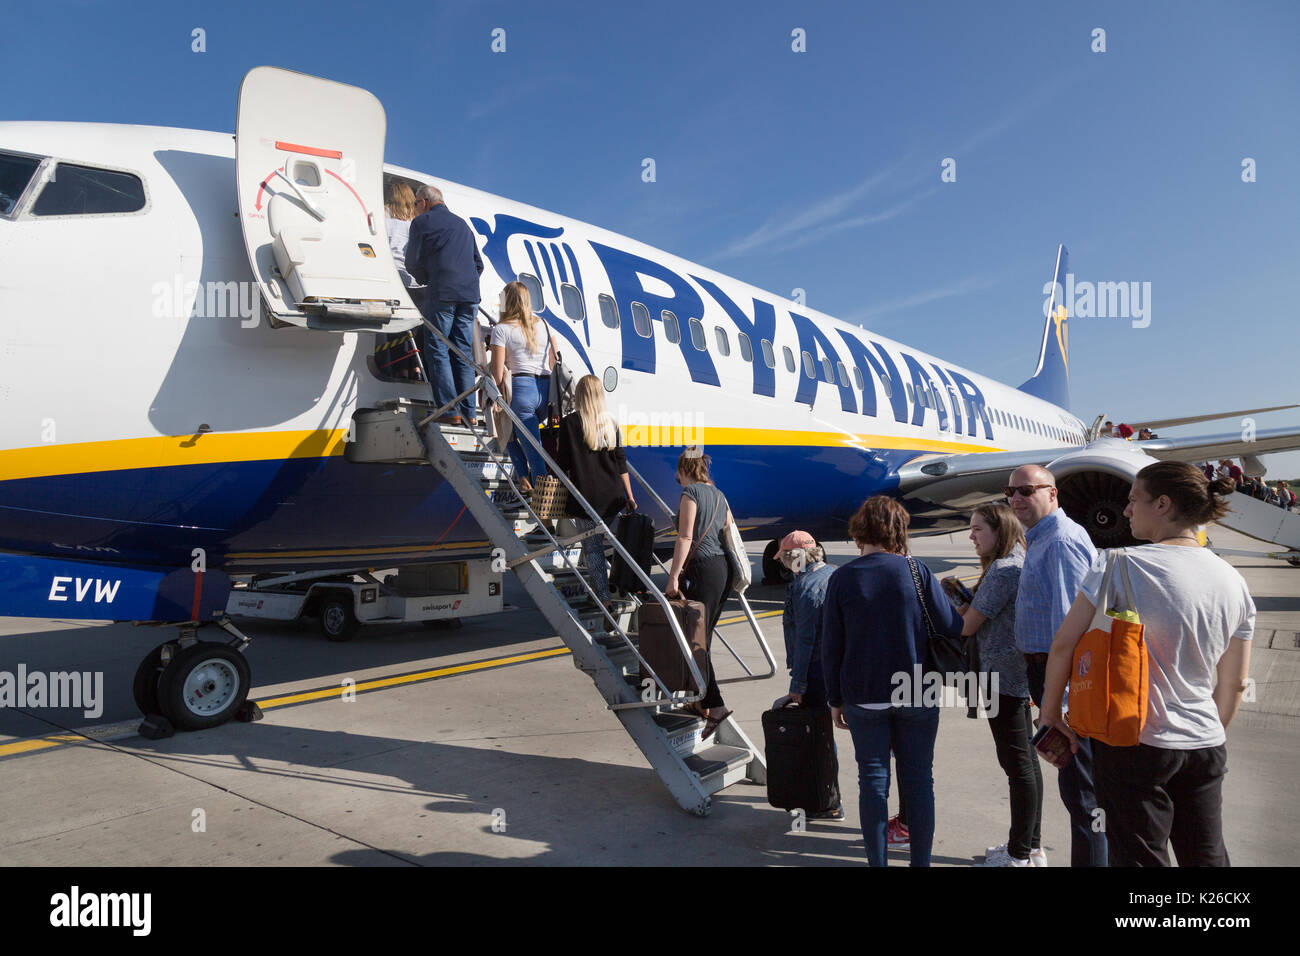 Boarding Ryanair plane - passengers boarding a Ryanair plane at Stansted airport UK Stock Photo